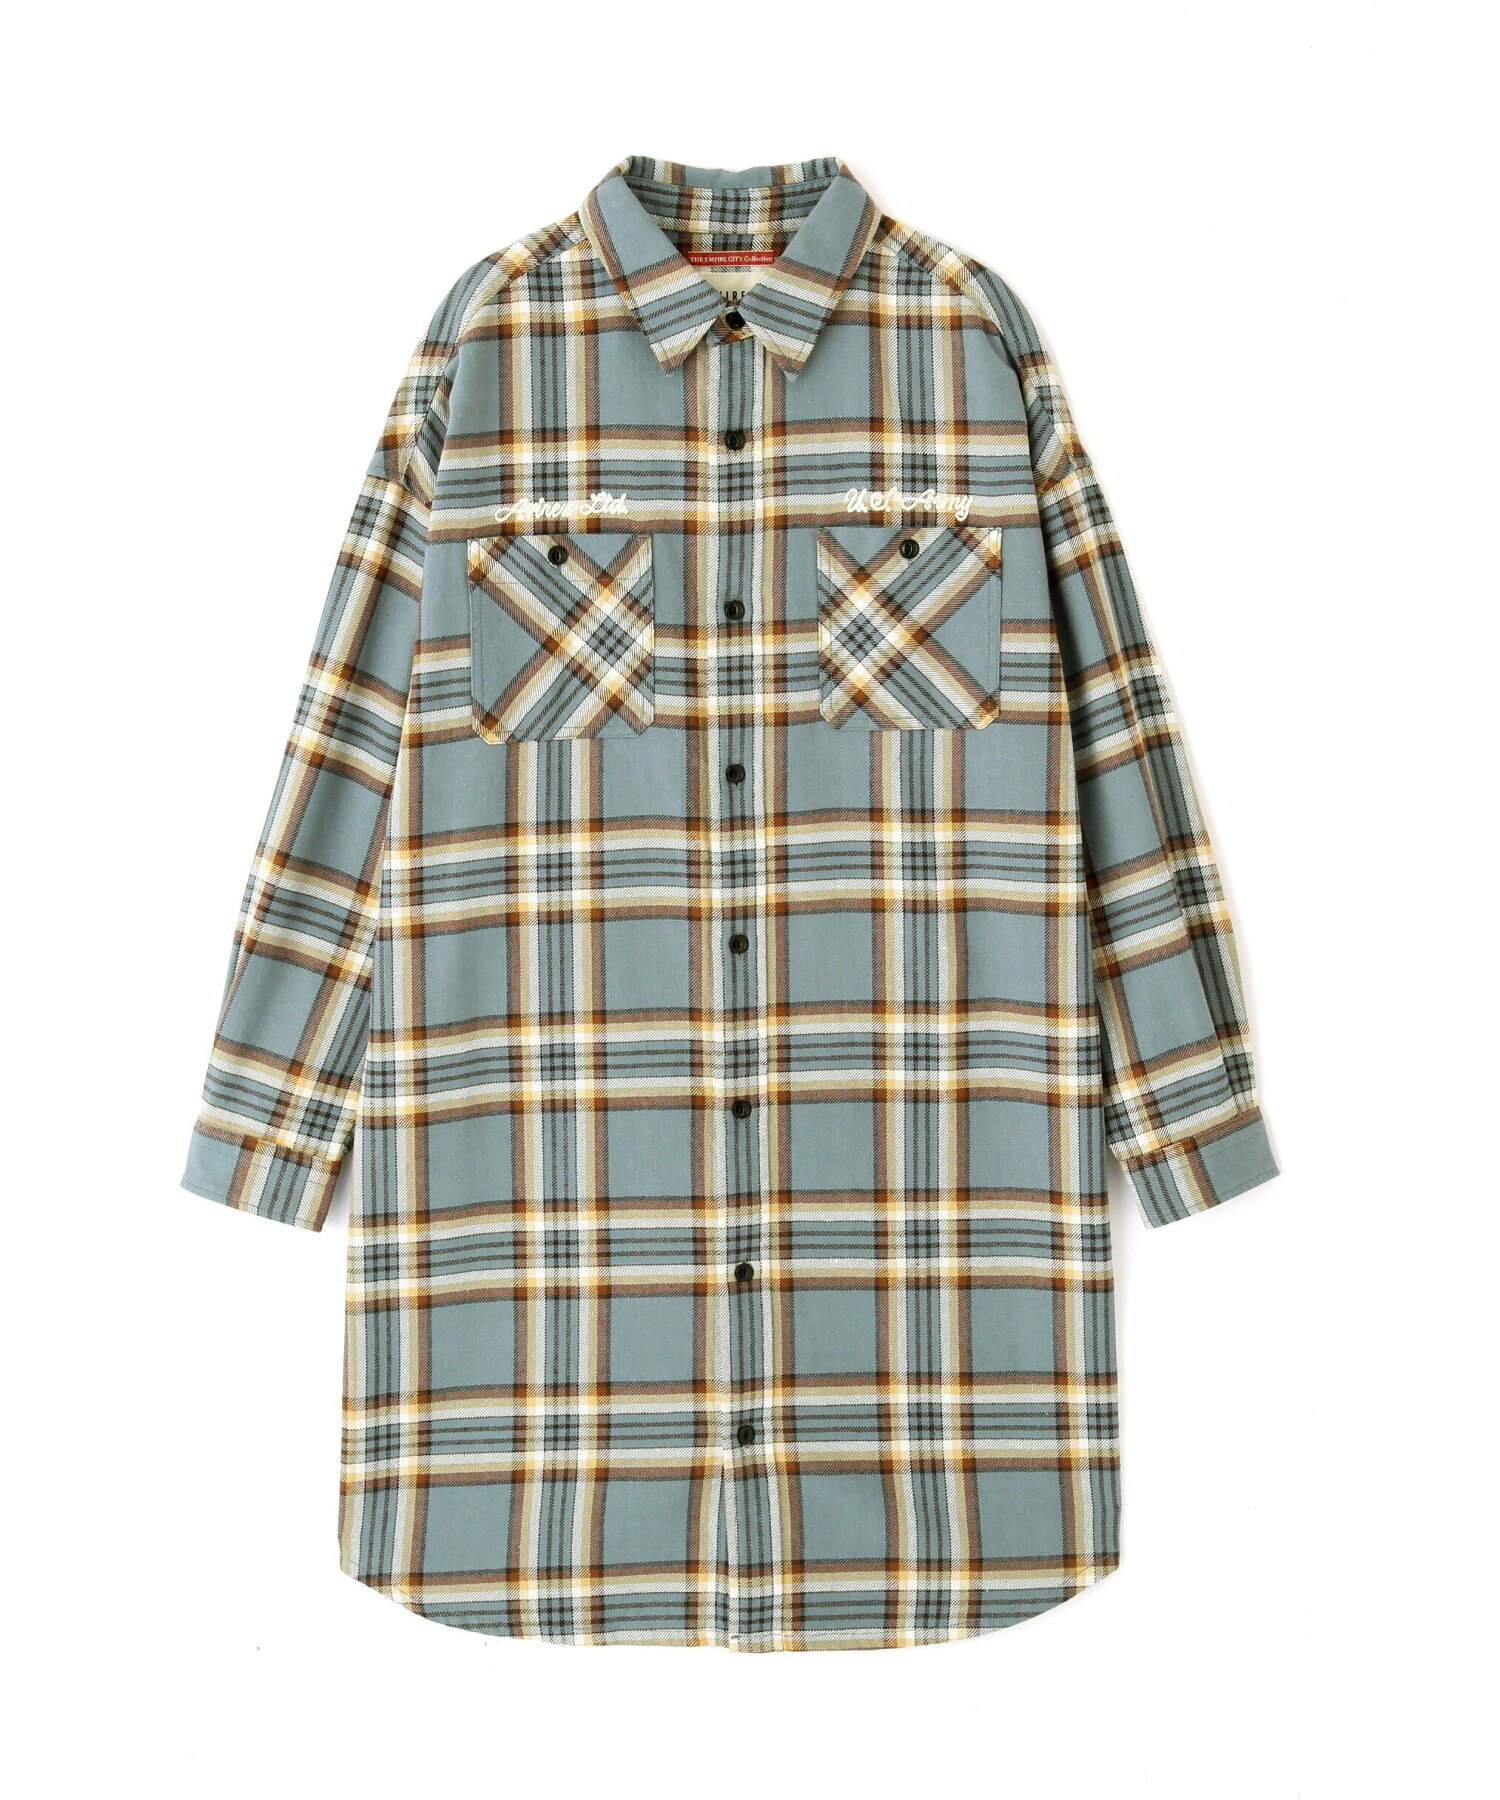 《COLLECTION》L/S COMBI PATTERN CHECK SHIRT ONEPIECE